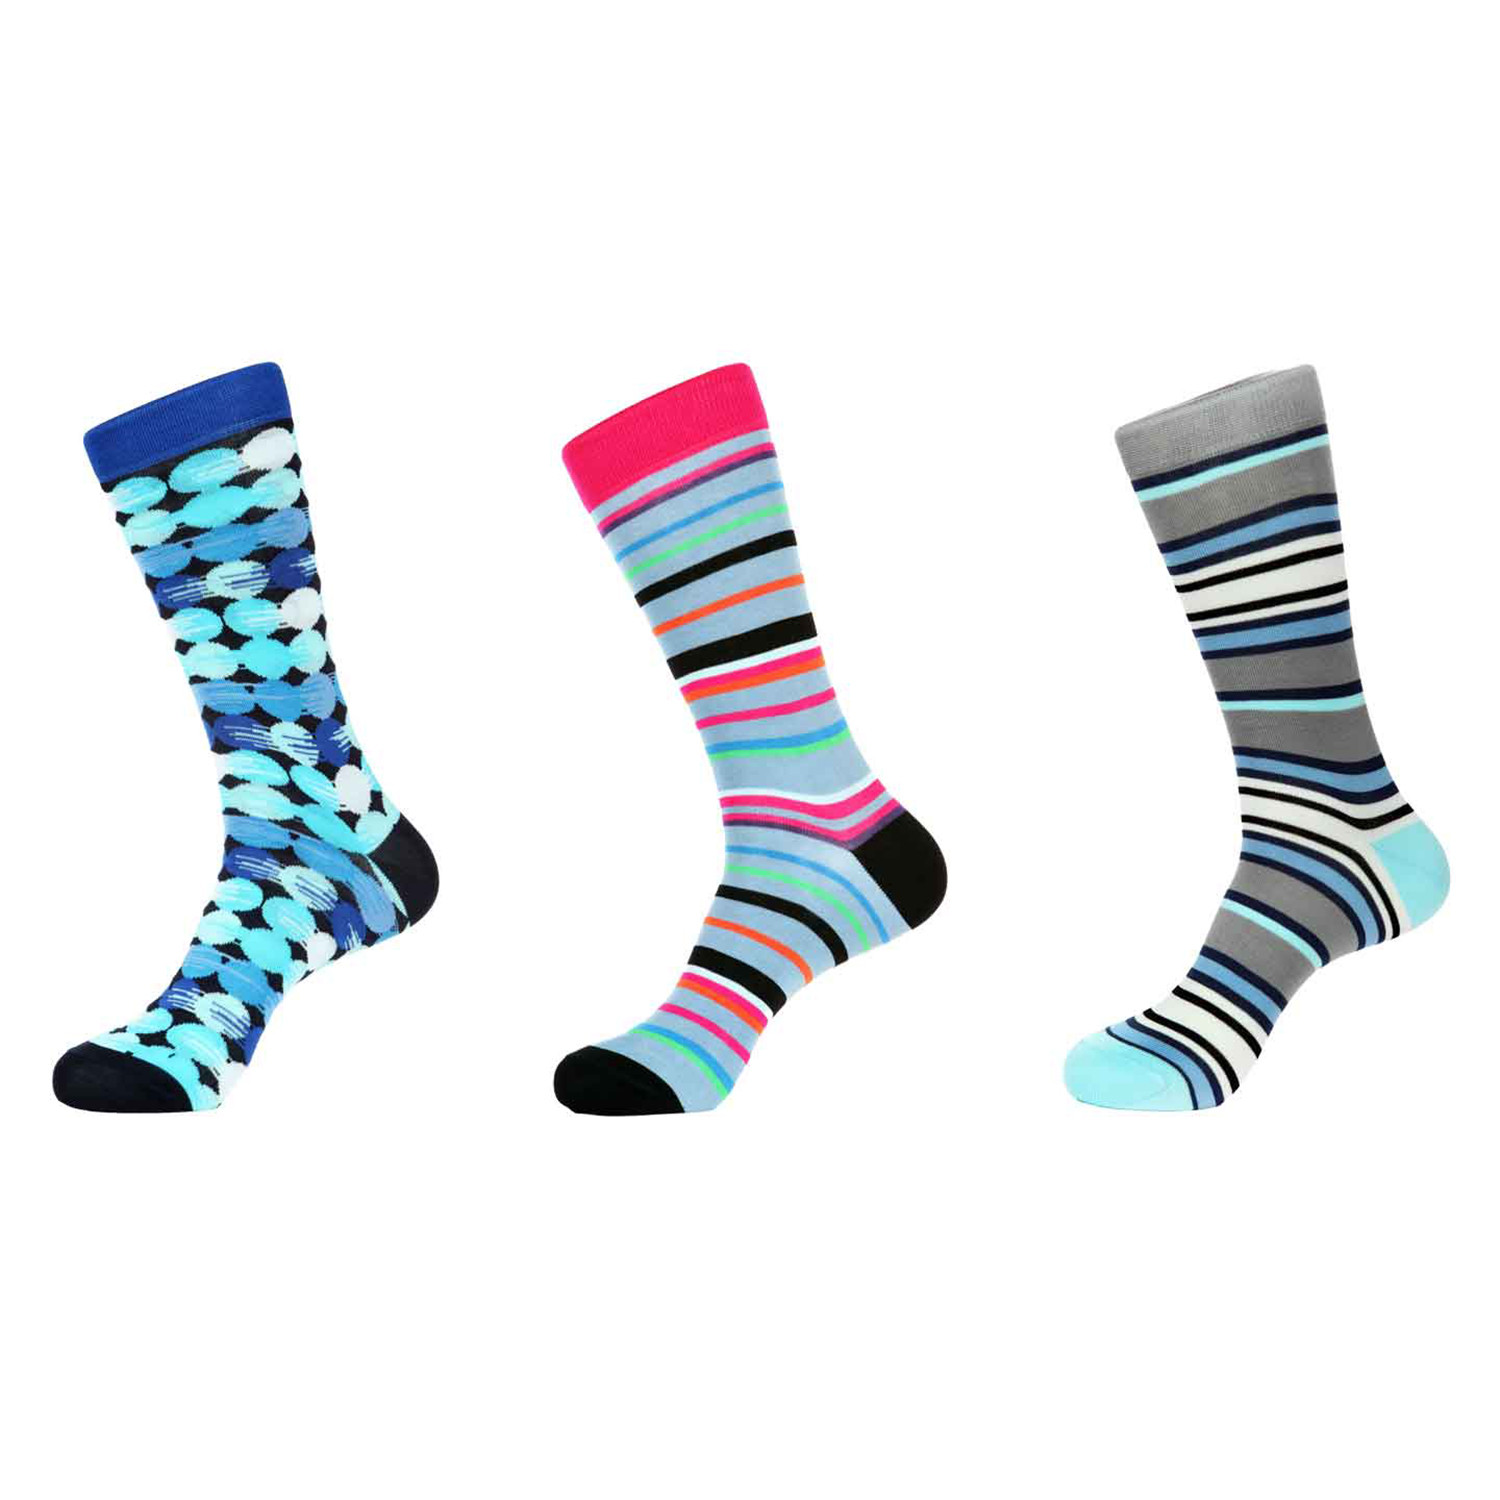 Lincoln Mercerized Cotton Socks // 3 Pack - Jared Lang - Touch of Modern